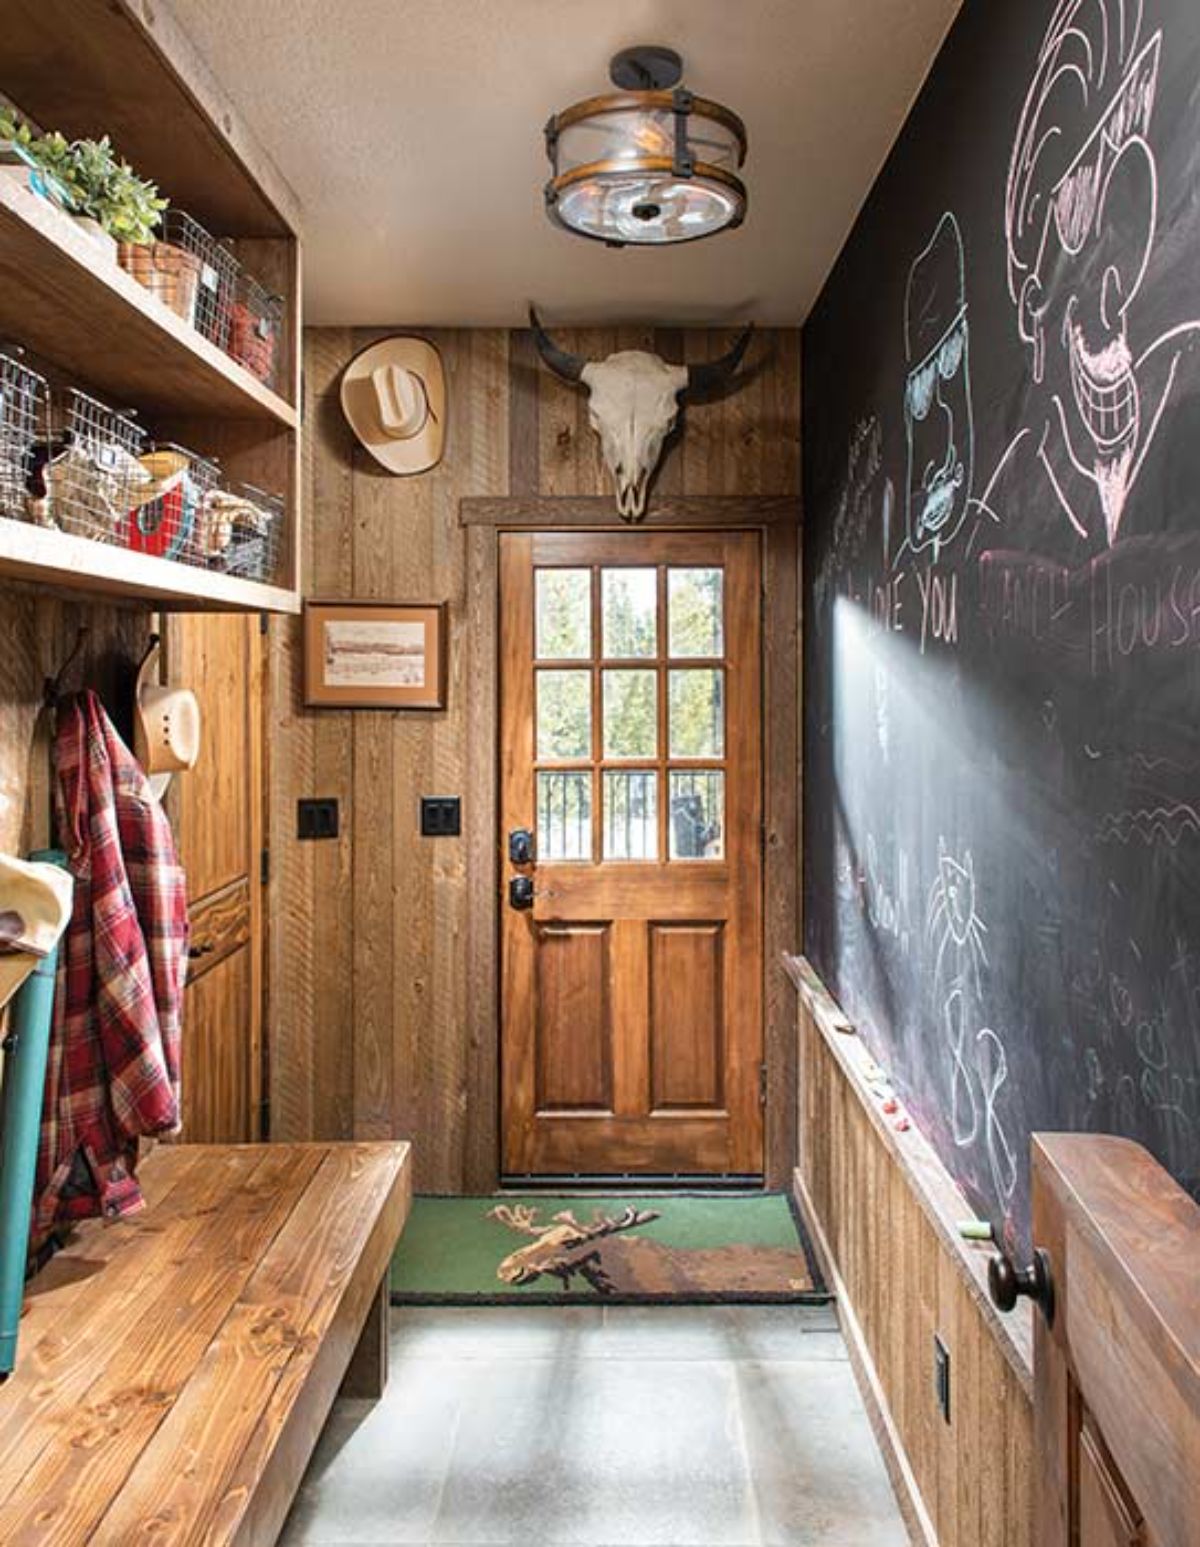 chalkboard wall on right with door at end and shelves on left